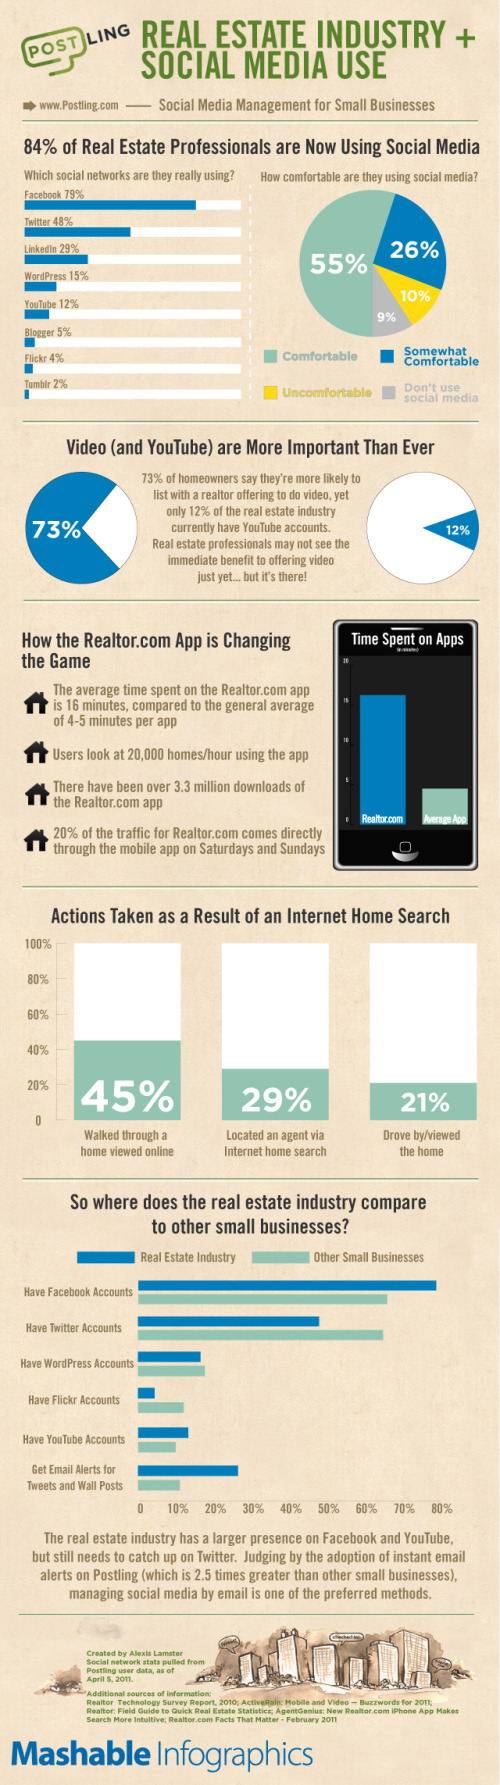 Real Estate Infographic - Real Estate Industry + Social Media Use